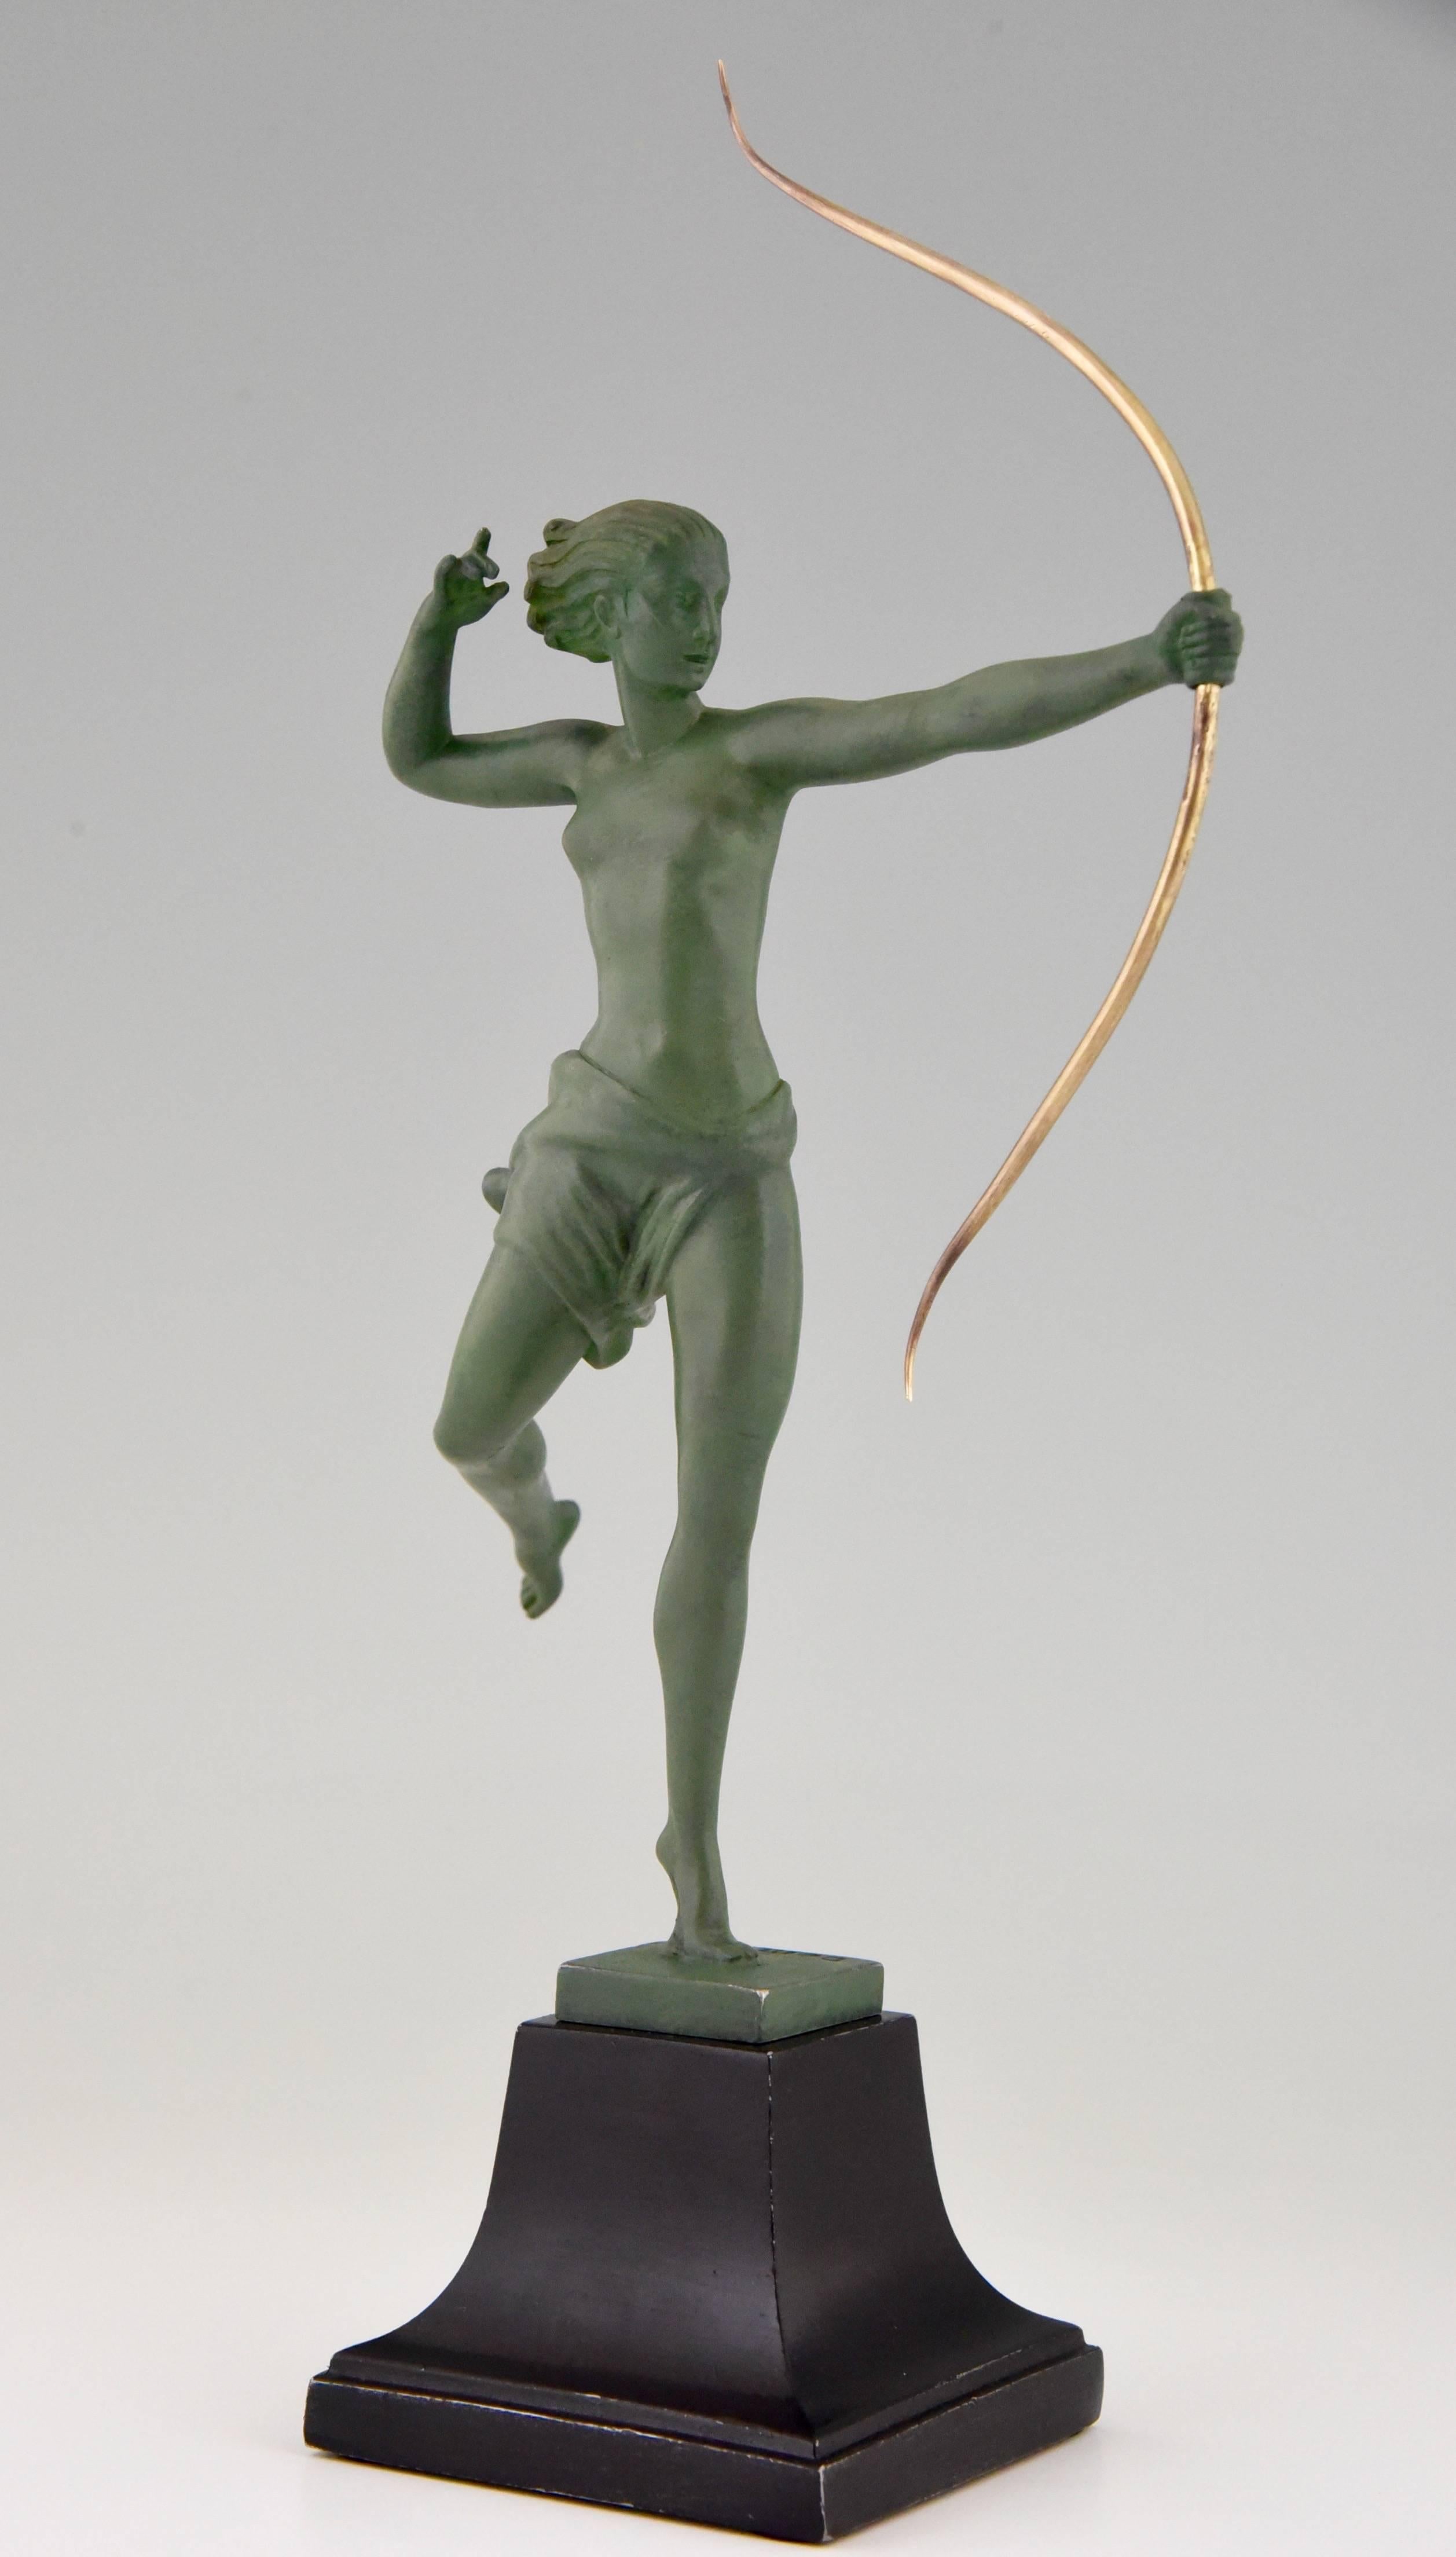 20th Century French Art Deco Sculpture of Diana Nude with Bow by De Marco, 1930